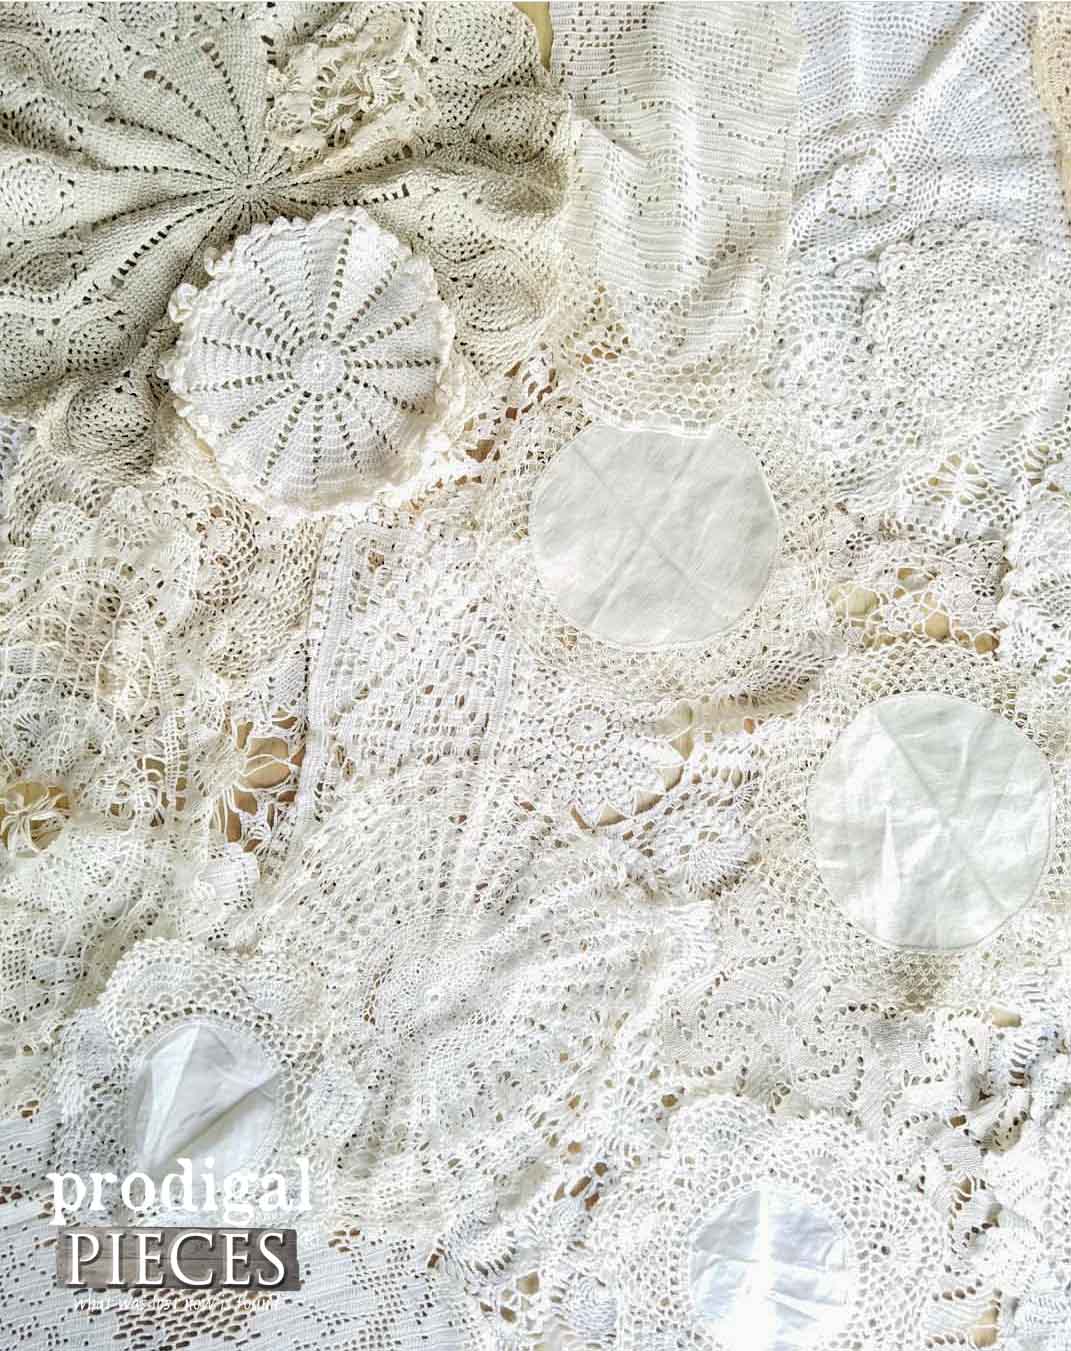 Collection of Vintage Doilies by Prodigal Pieces | prodigalpieces.com